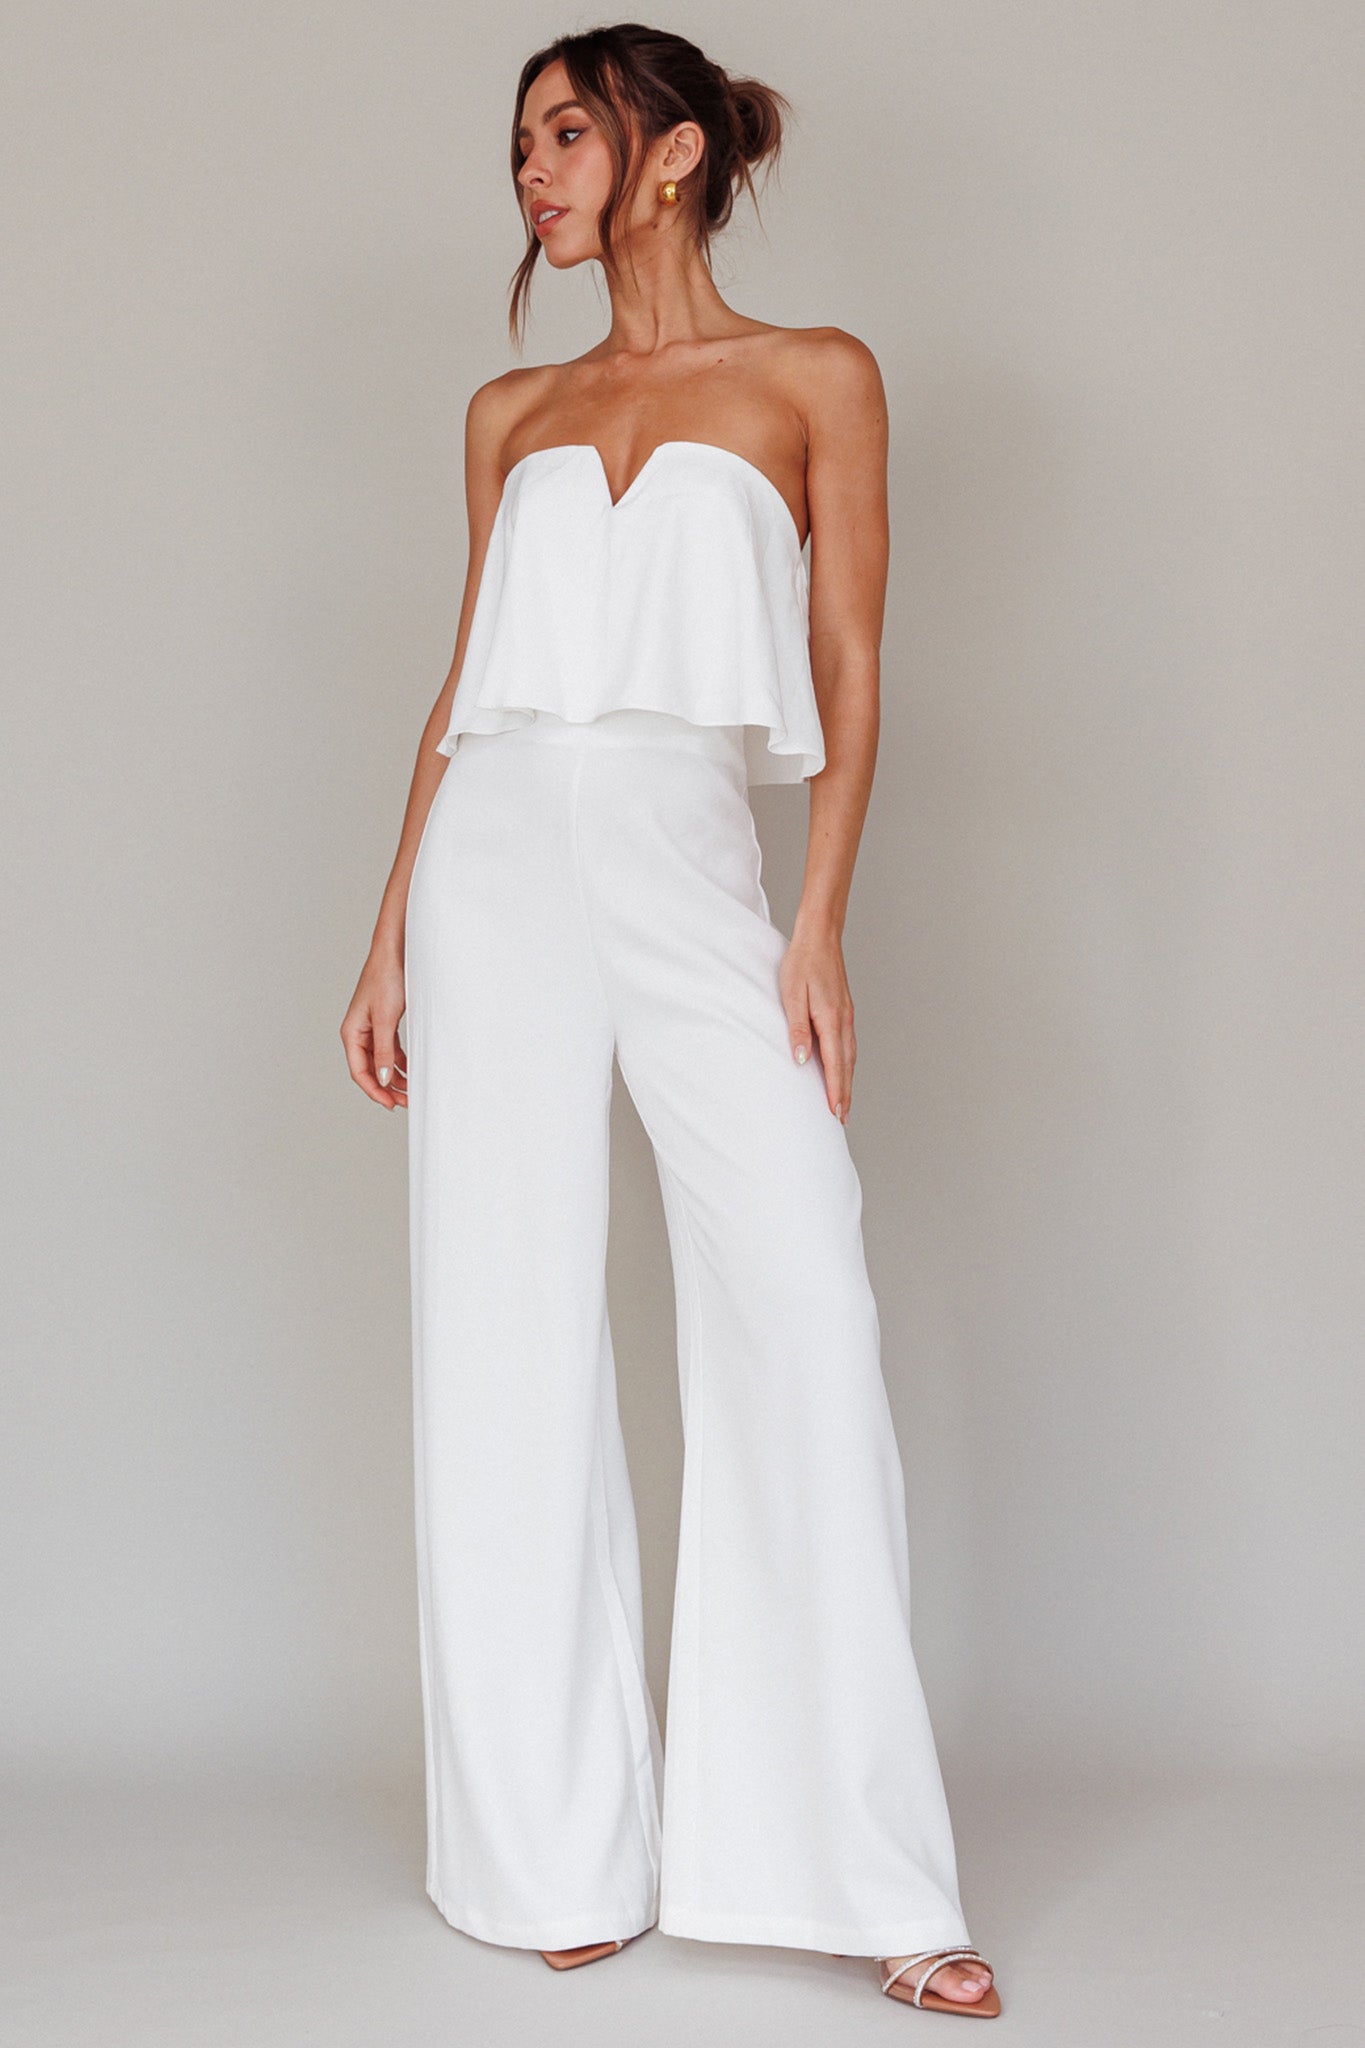 Shop the Butterfly Kiss Strapless Jumpsuit Off White | Selfie Leslie